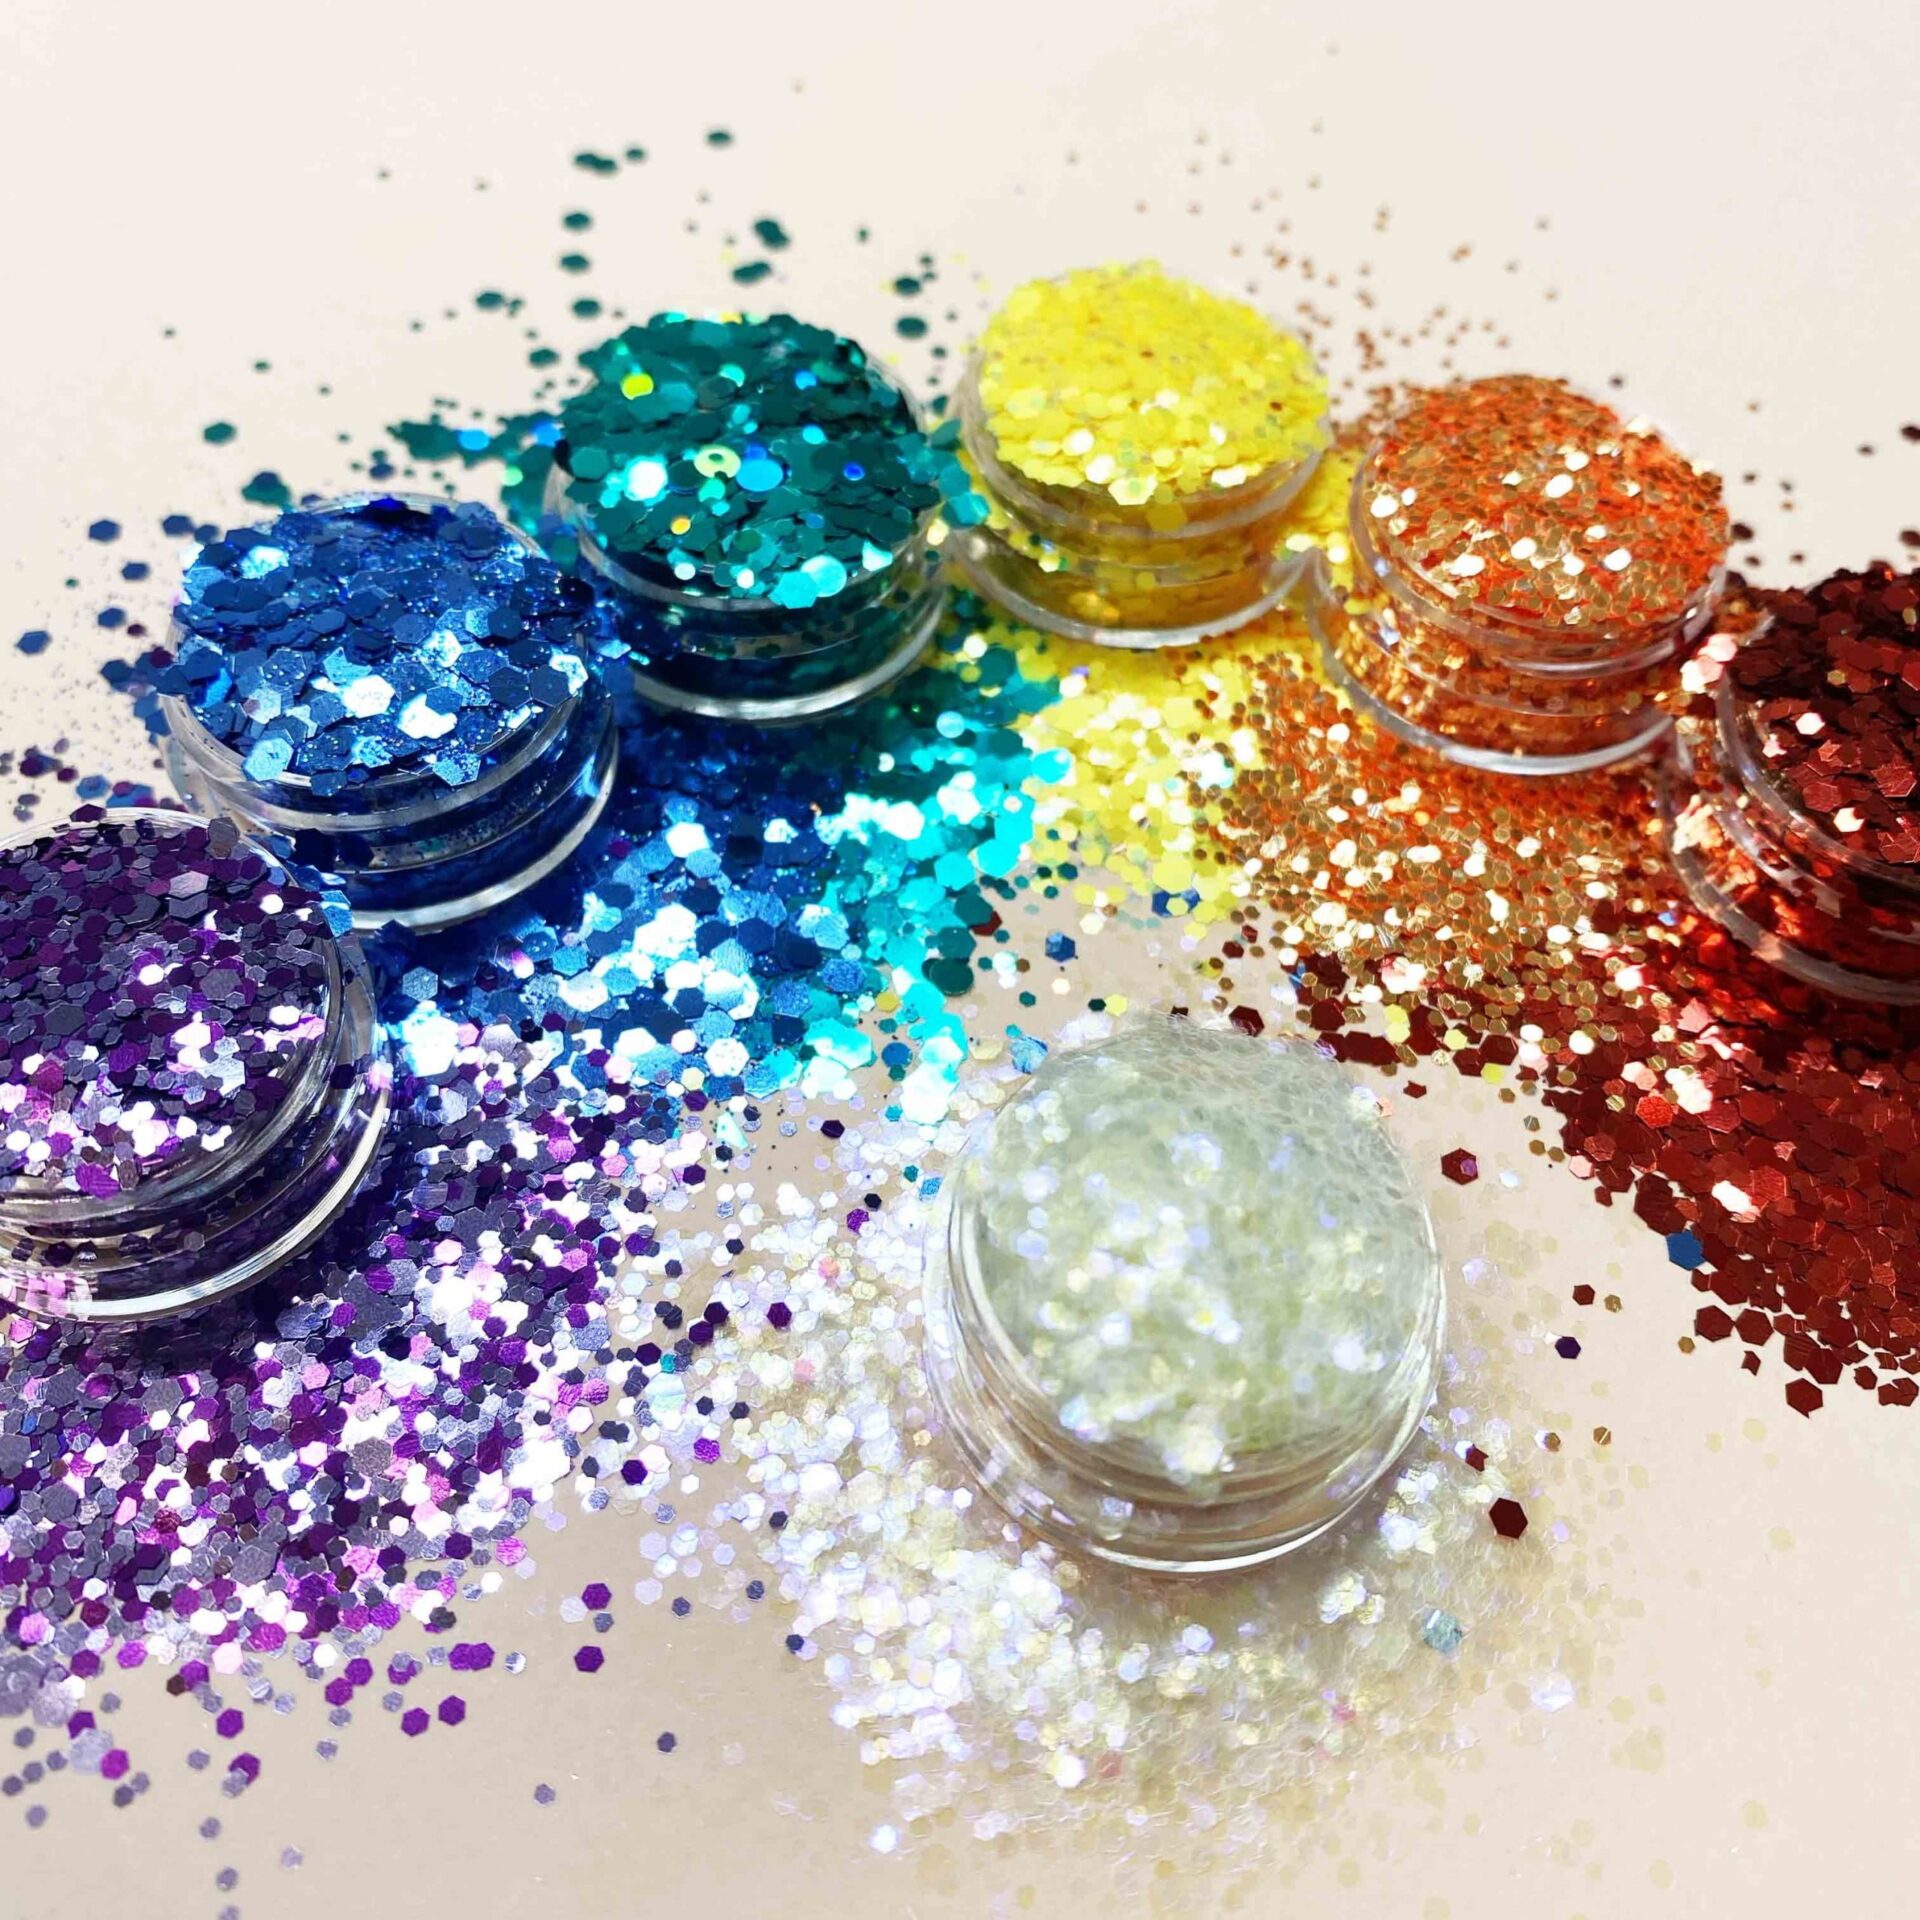 Though Beautiful, Glitter Is Quite Damaging To The Environment